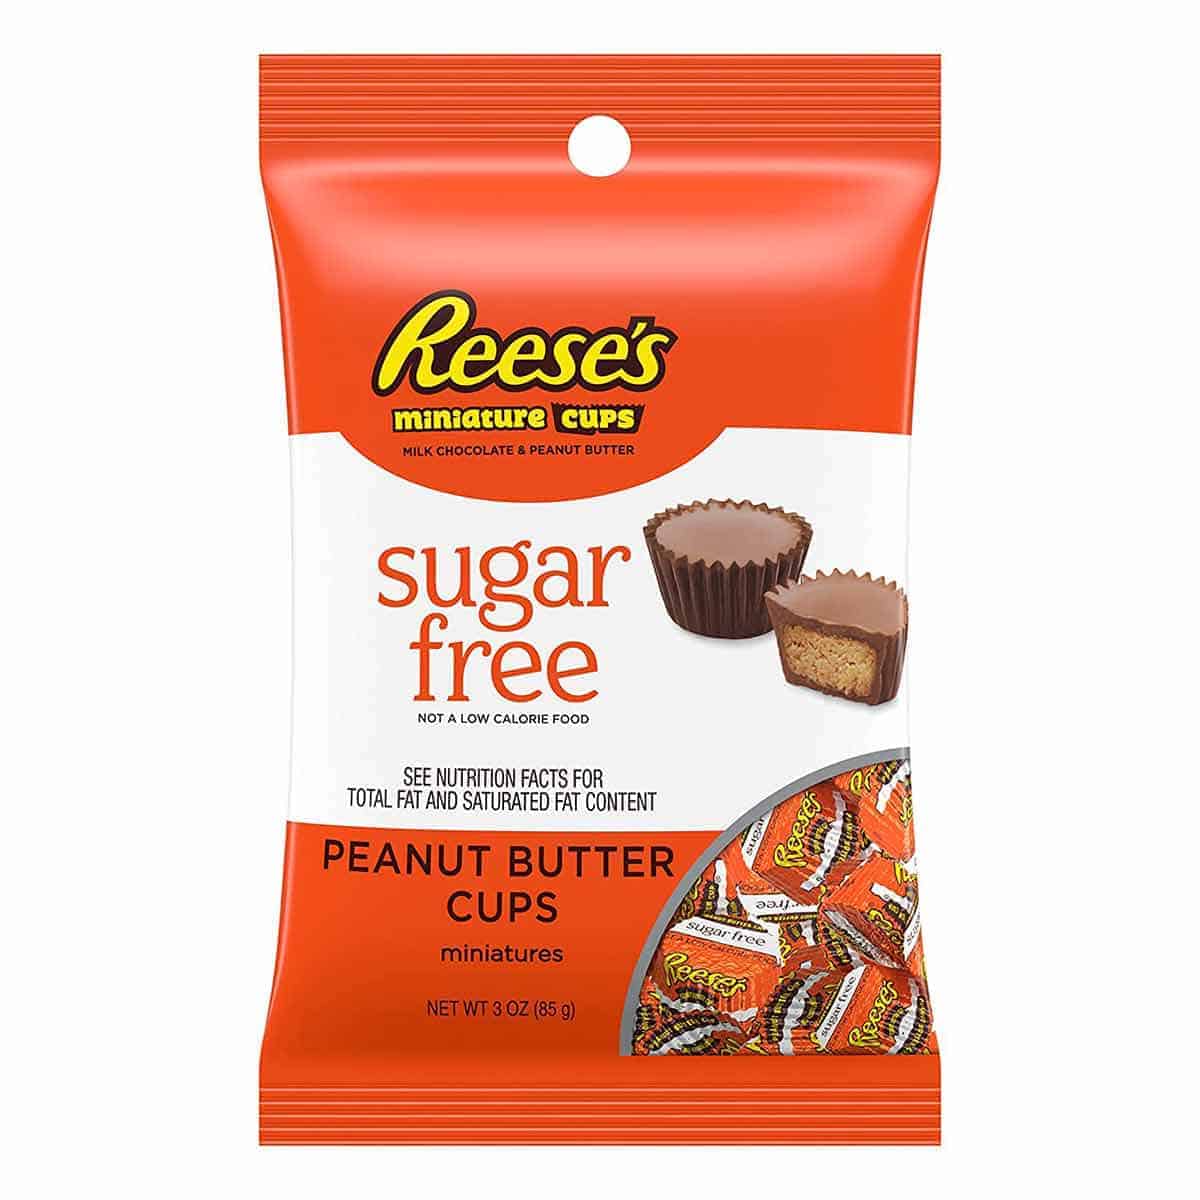 A packet of Reeses miniature sugar free peanut butter cups